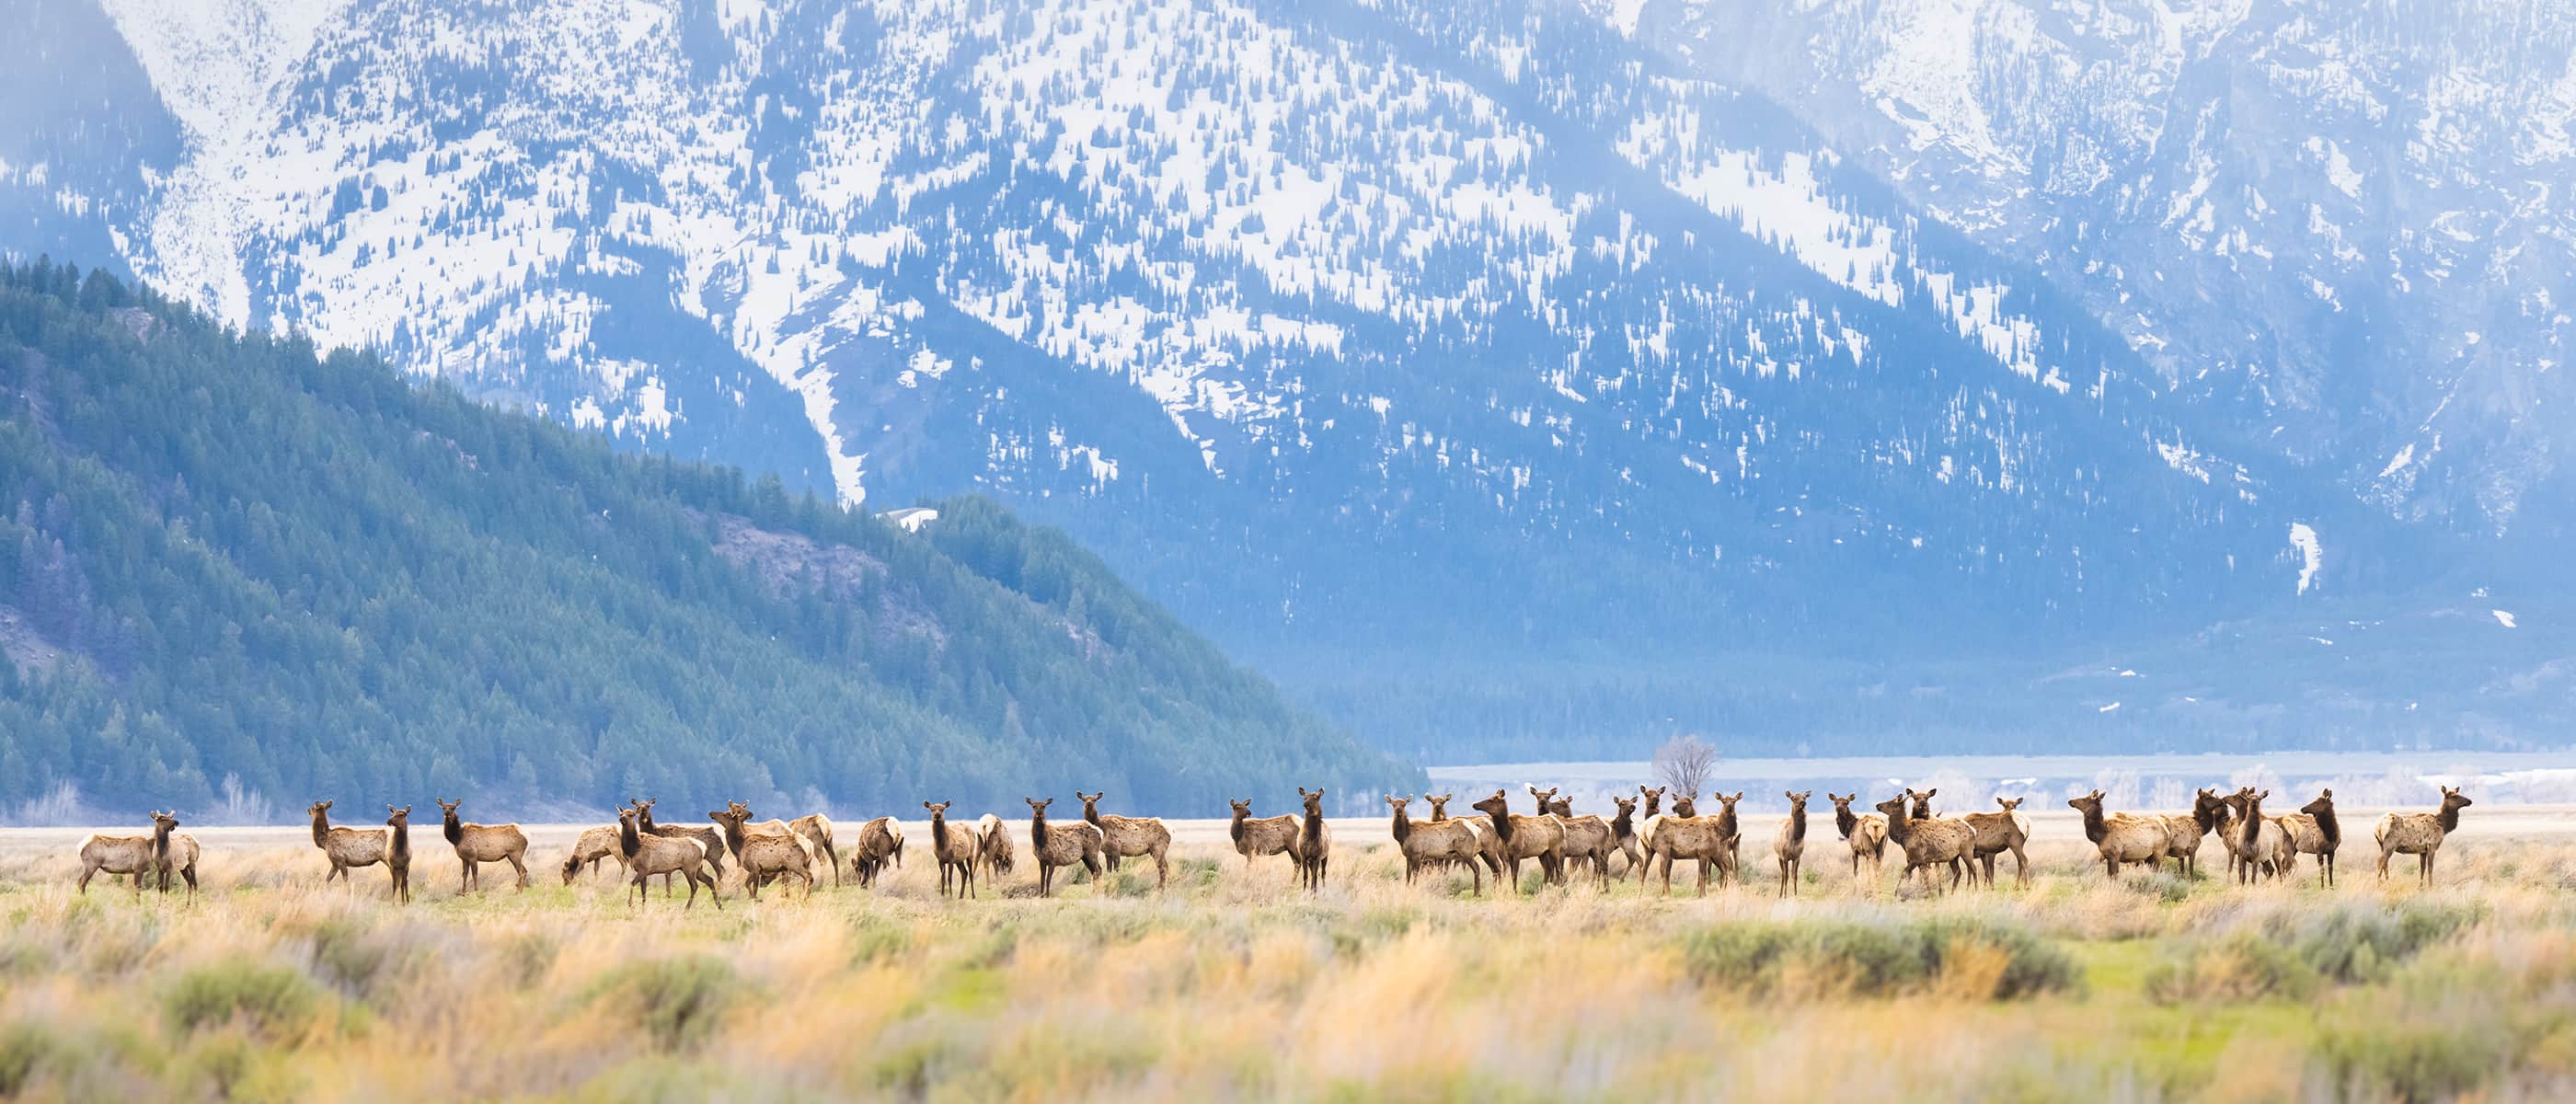 Photo of a herd of animals in a valley with hills and snowy mountains in the background